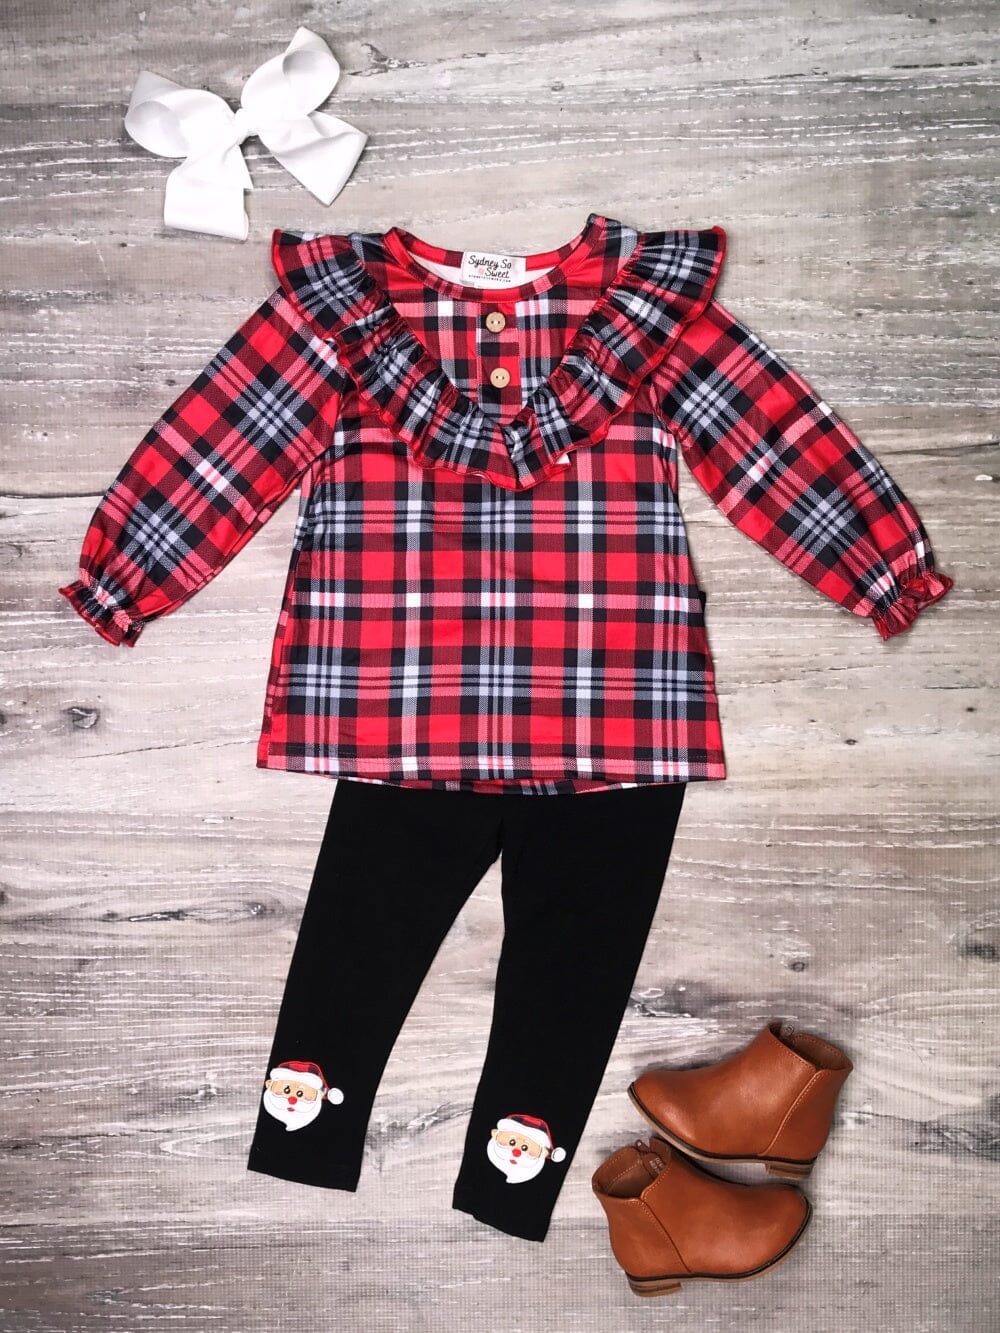 Perfectly Plaid Santa Ruffle Button Girls Christmas Leggings Outfit - Sydney So Sweet